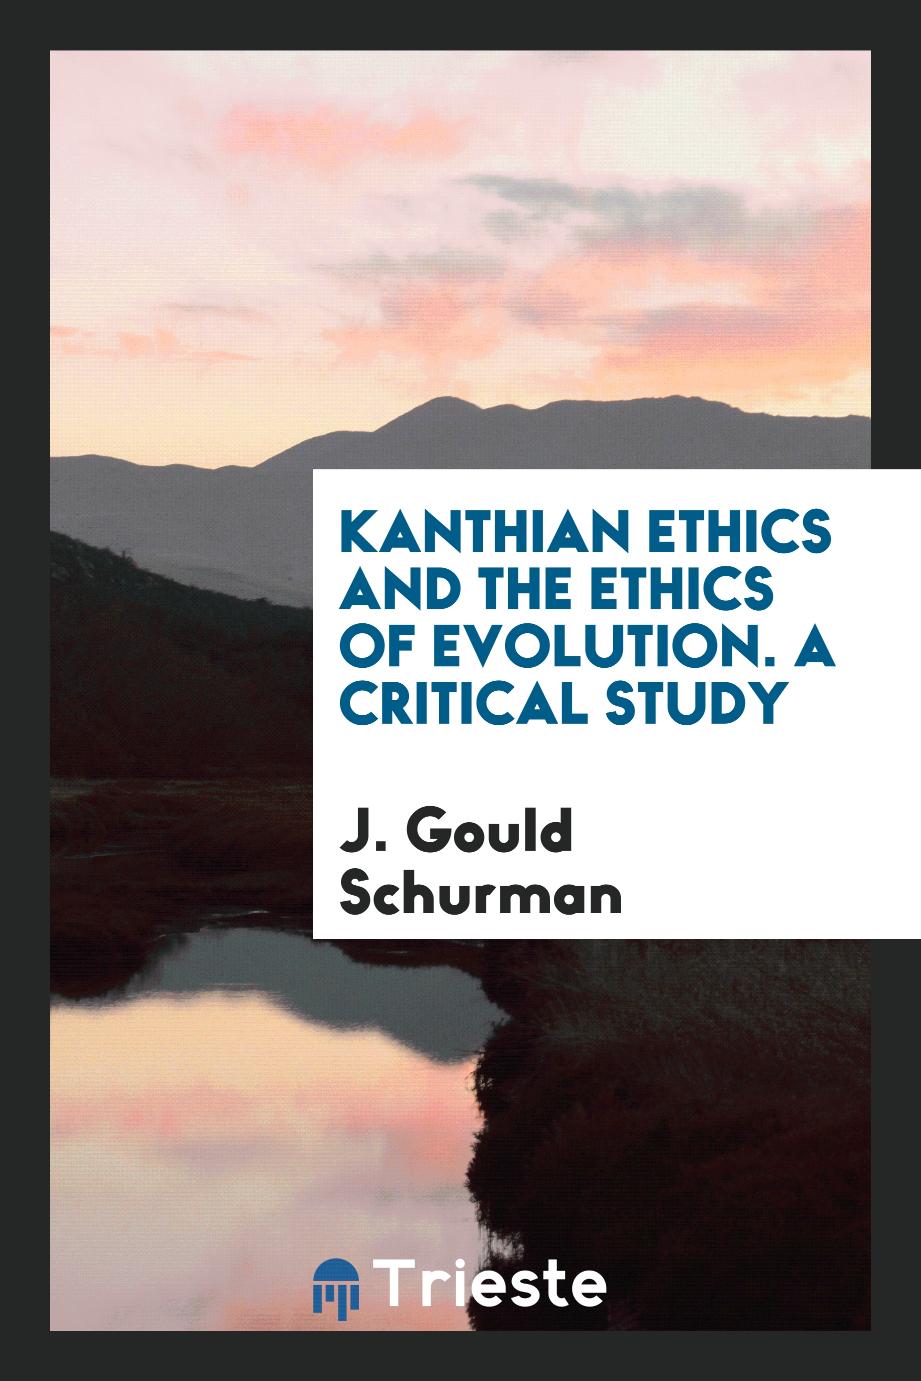 Kanthian Ethics and the Ethics of Evolution. A Critical Study